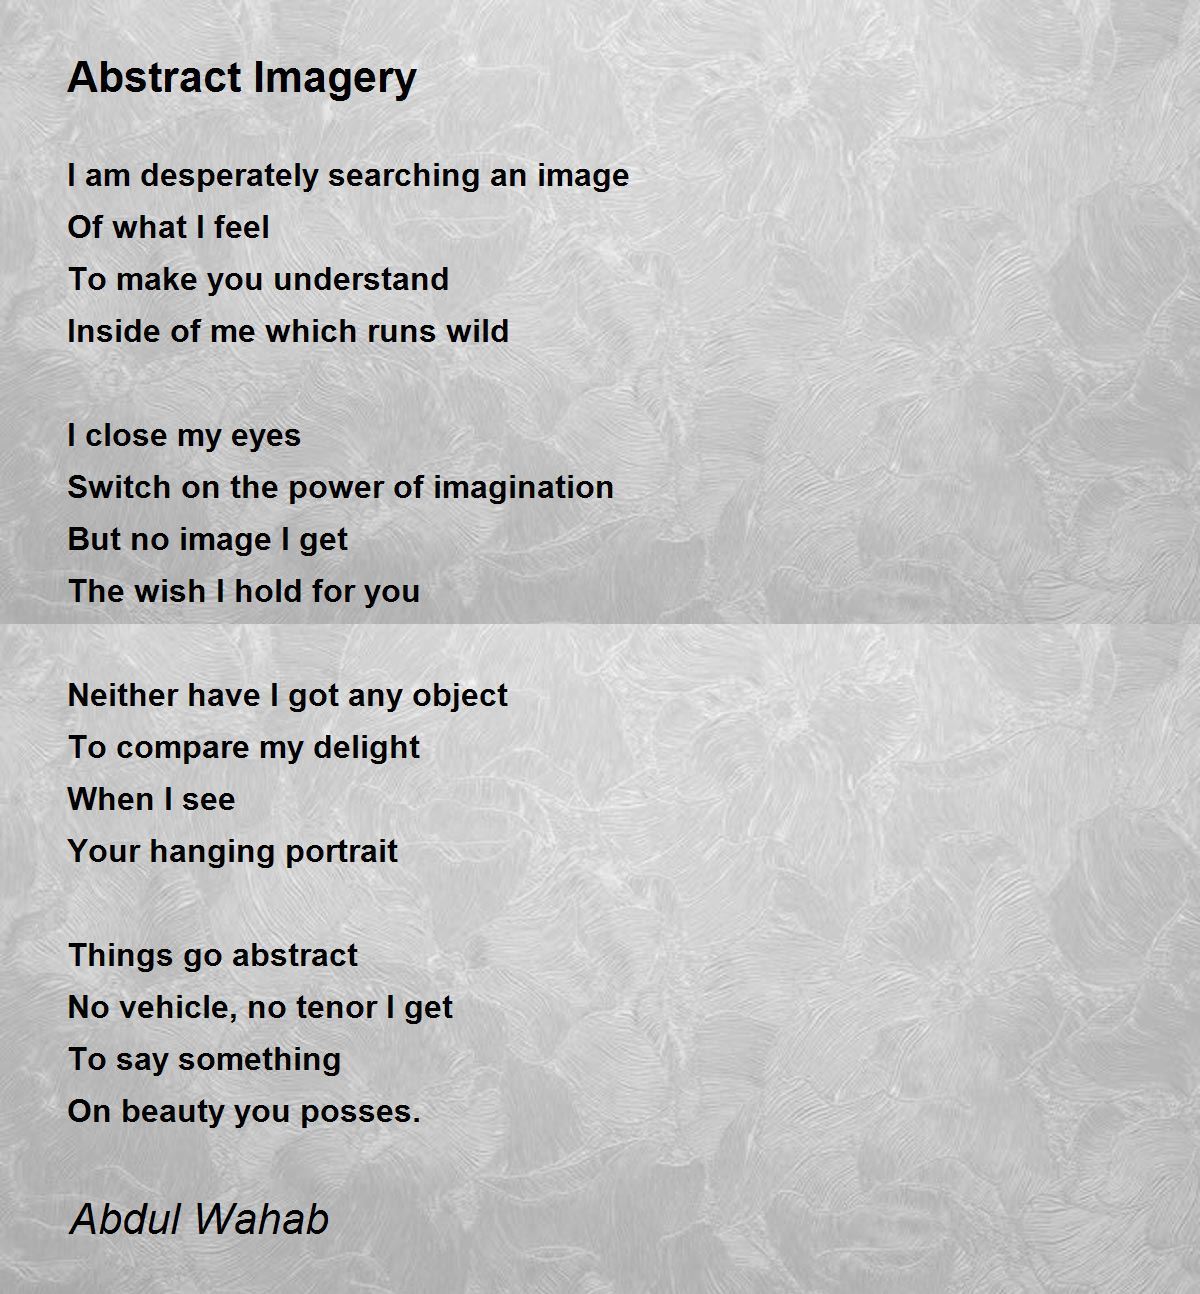 imagery poems